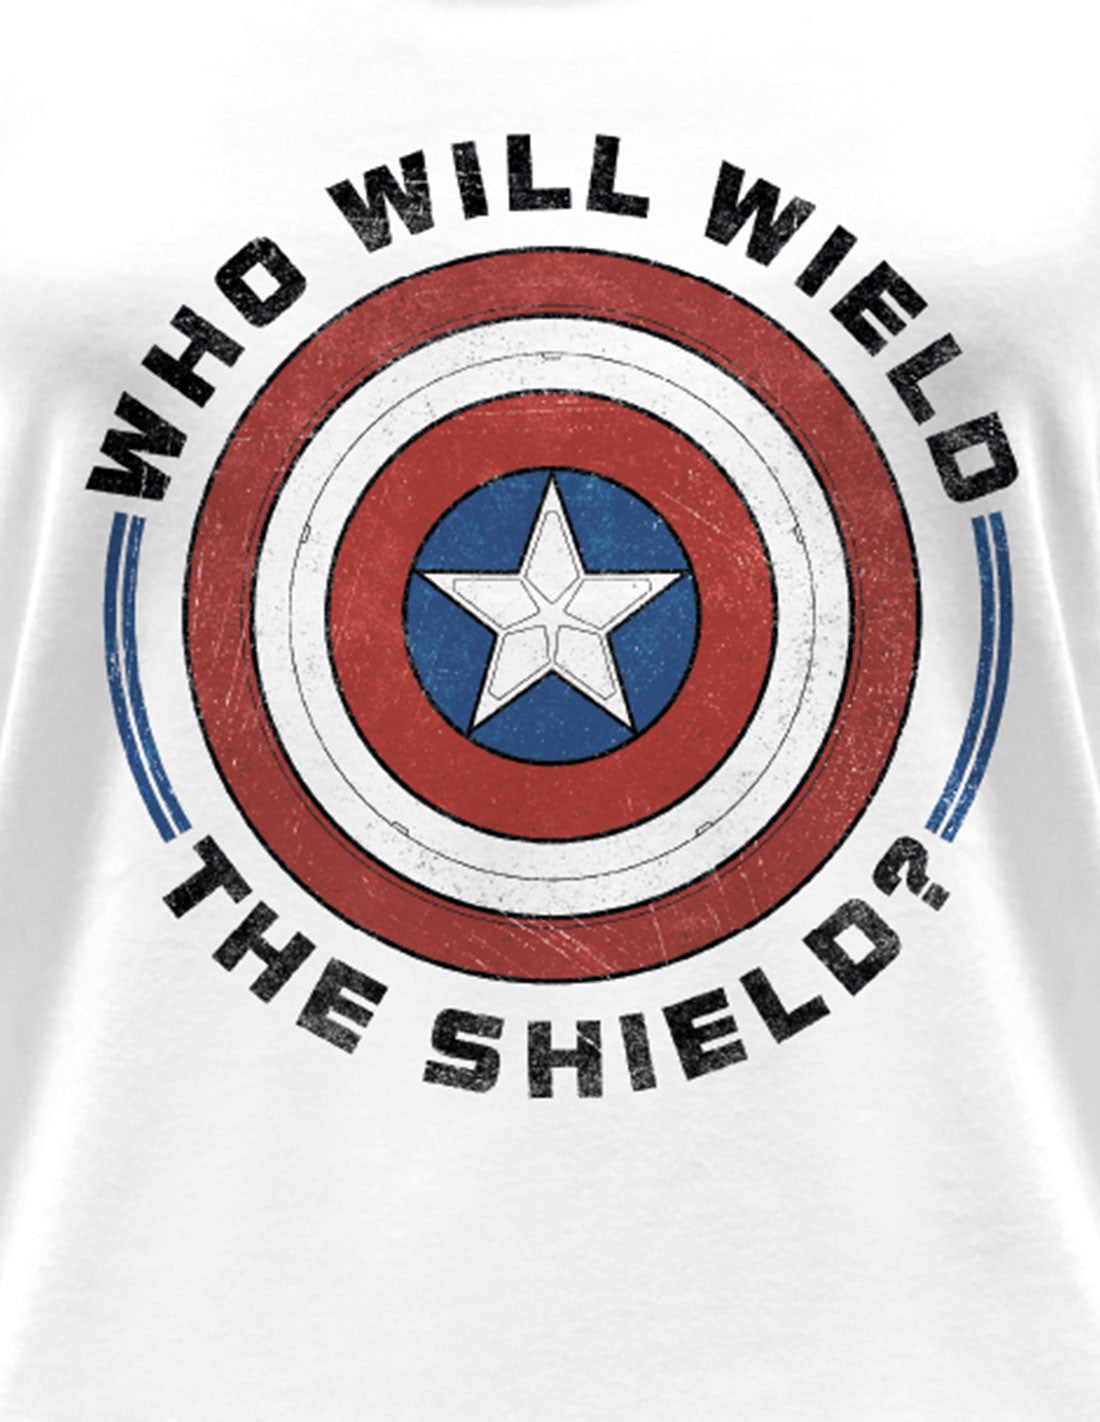 Women's T-shirt Falcon and the Winter Soldier MARVEL - Wield the shield painting